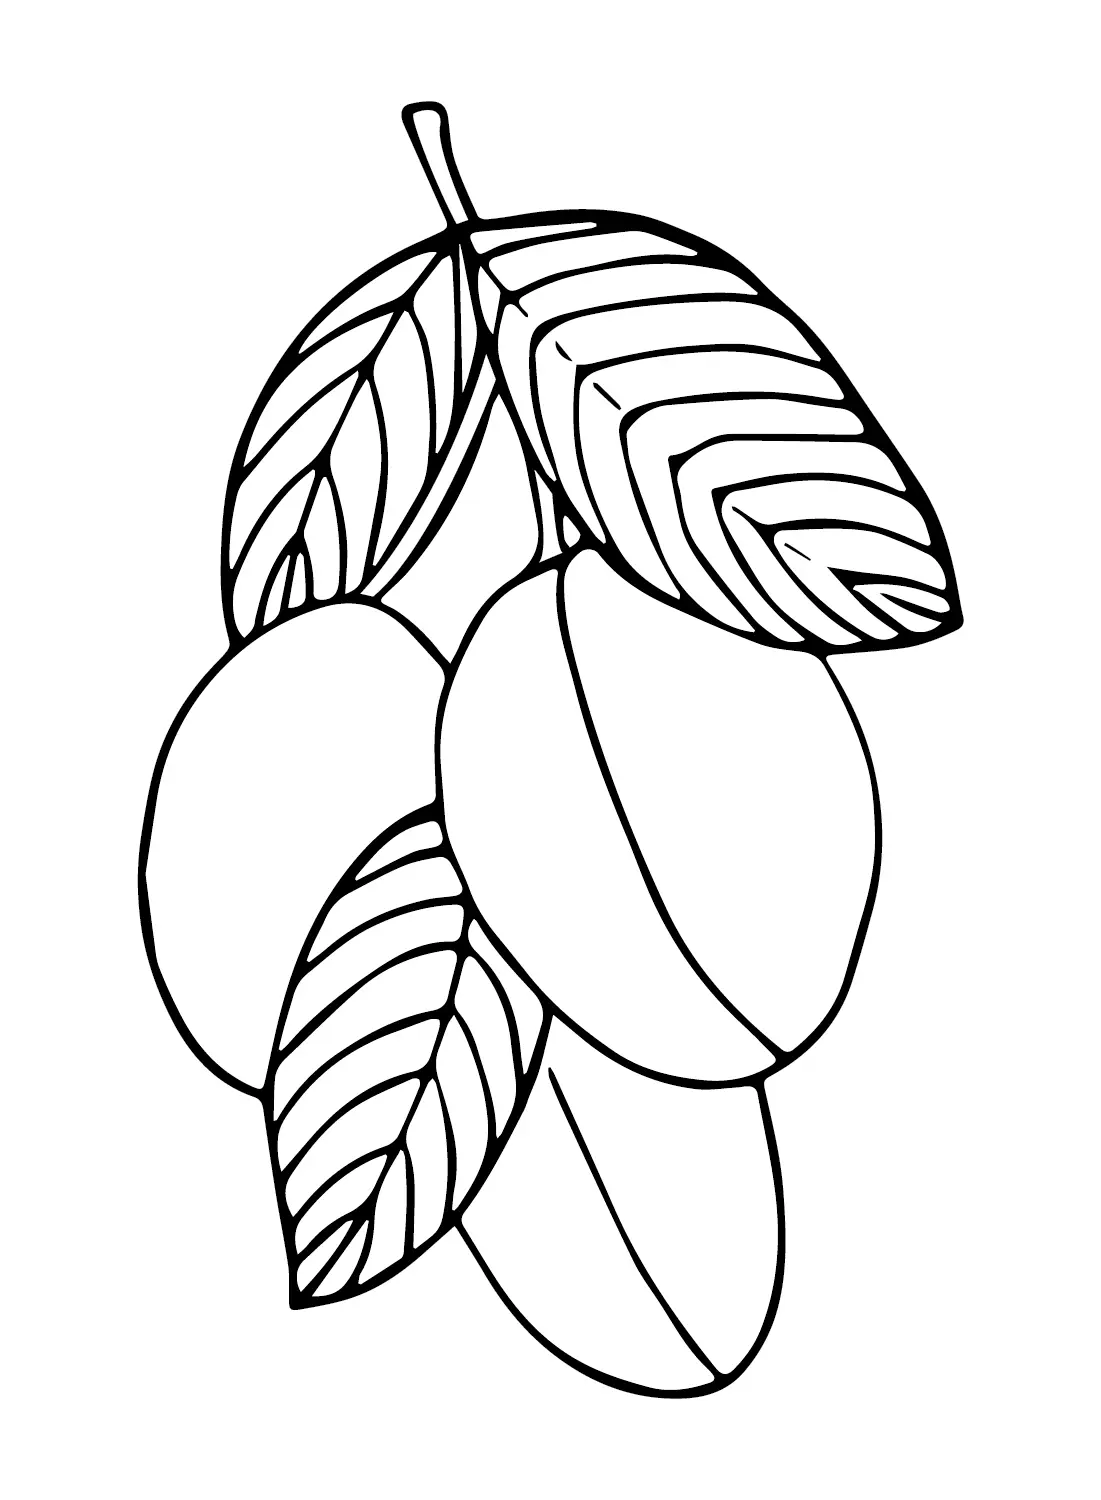 Plums Coloring Pages